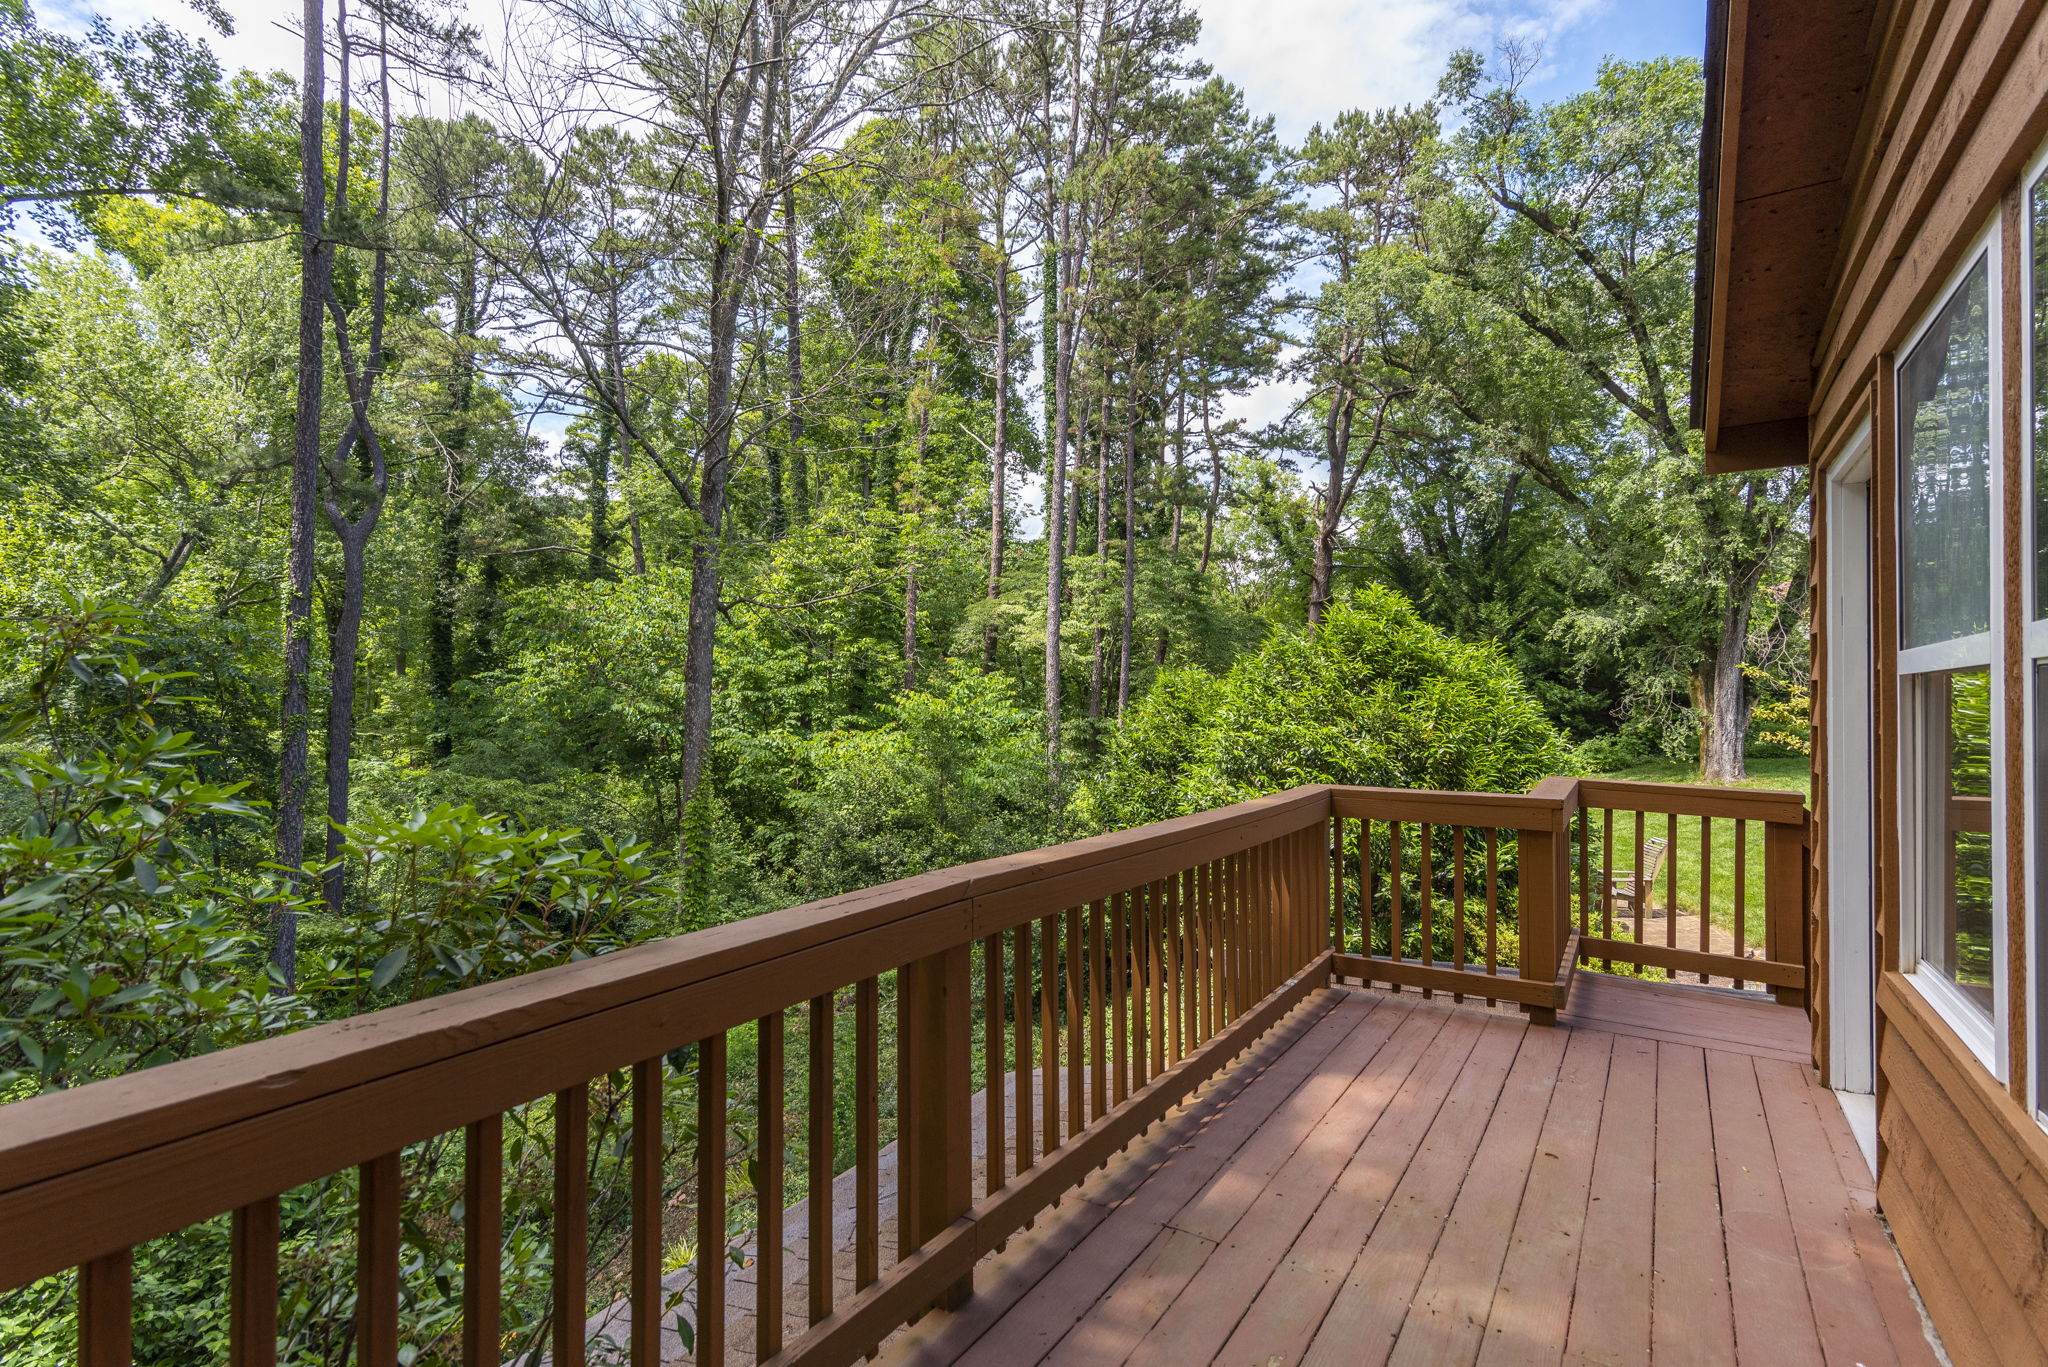  266 Old Haw Creek Rd, Asheville, NC 28805, US Photo 20